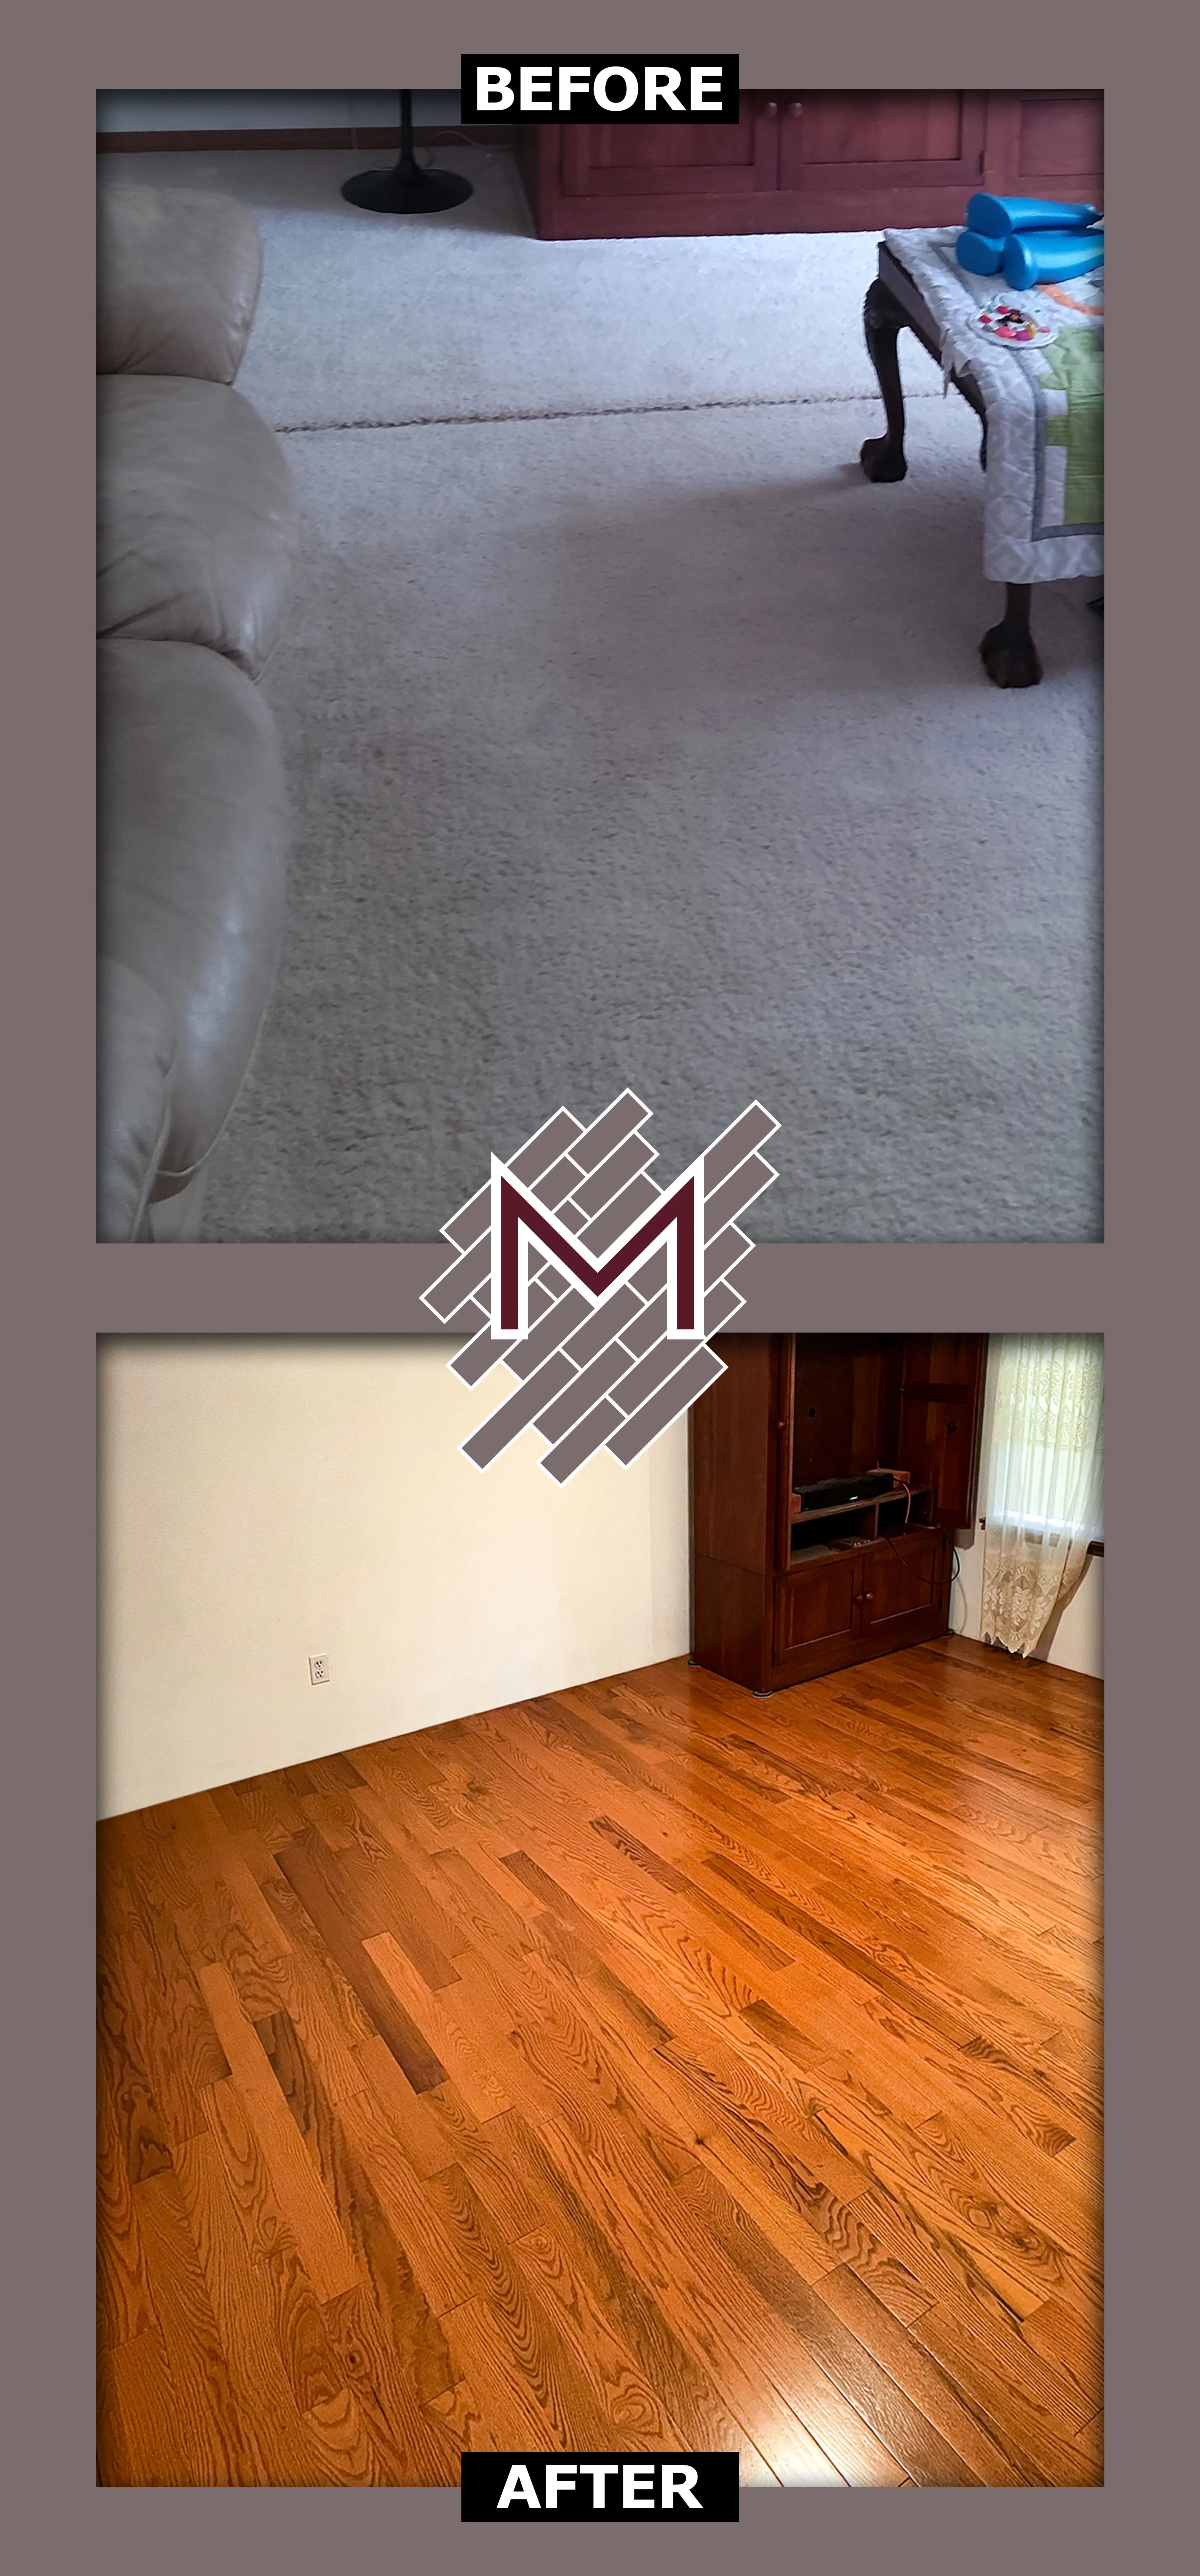 Before and after picture showing the old floor and the new floor. New flooring installation by Modern Flooring Services